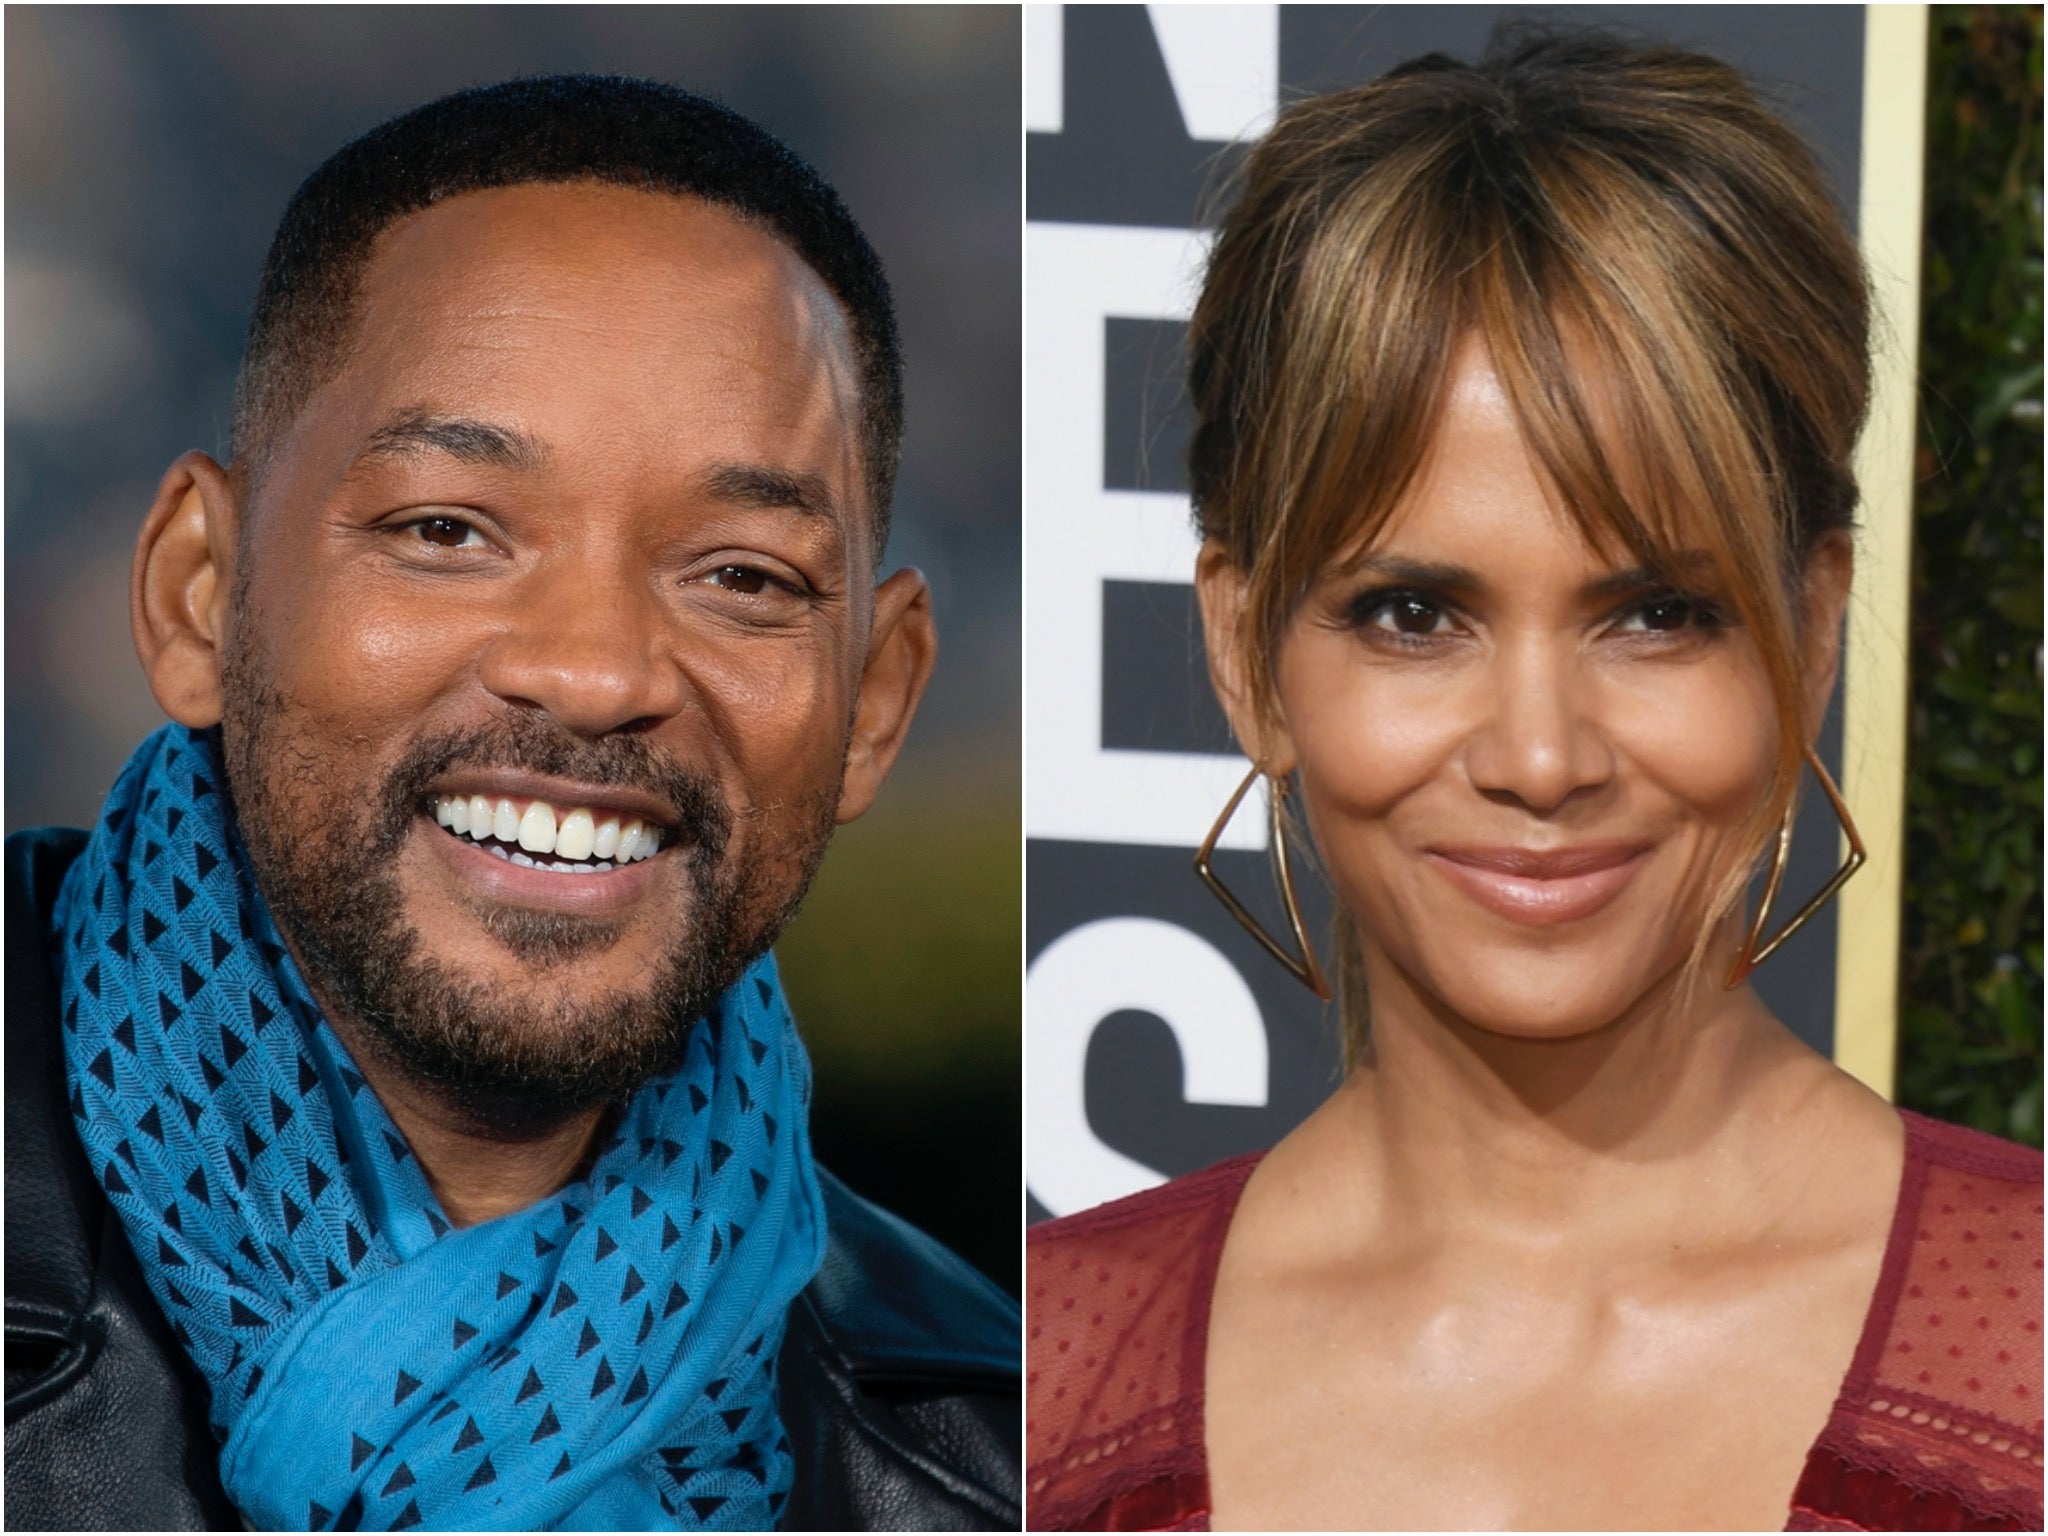 Will Smith and Halle Berry, who he planned to invite into his ‘harem’ of girlfriends